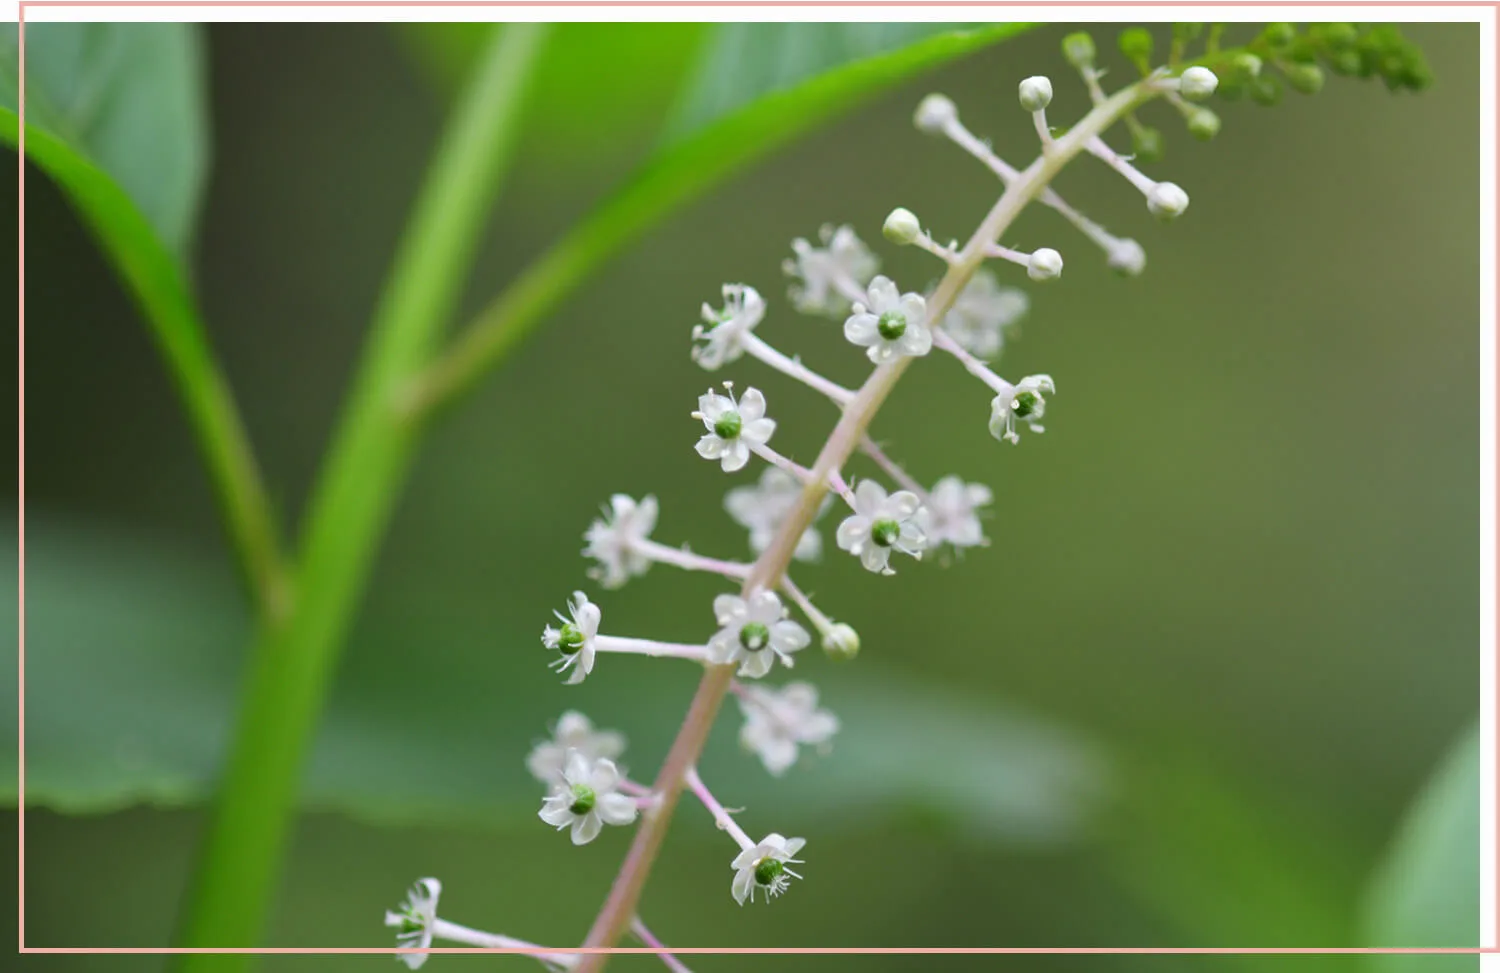 flowering-weeds-and-unexpected-beauty-27-pokeweed